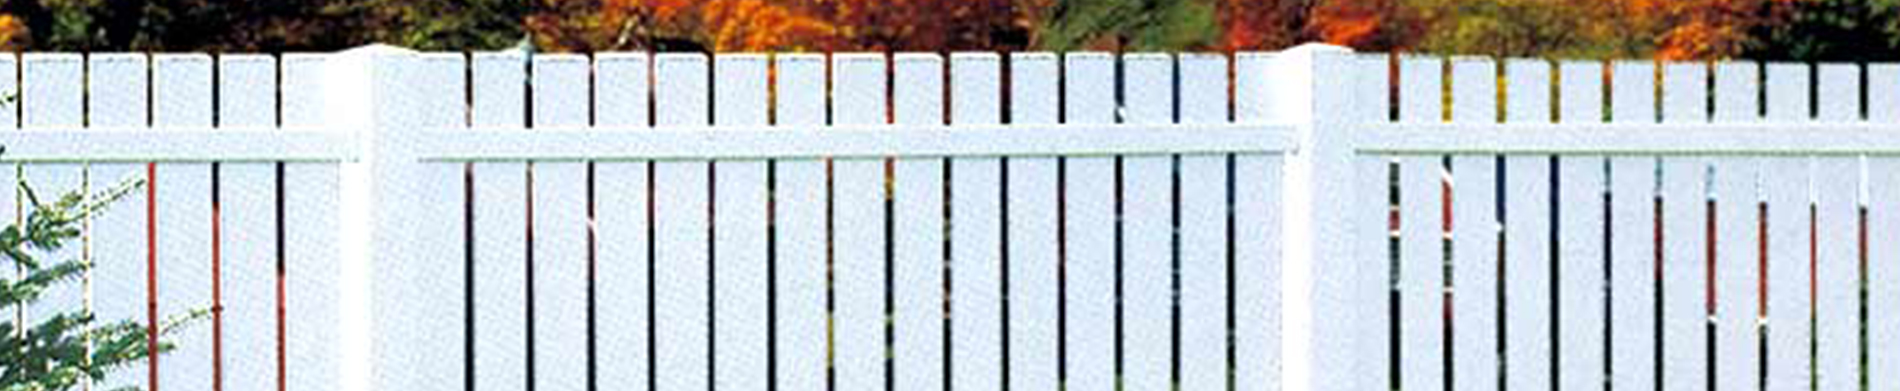 Why Should You Invest in a Semi-Private Vinyl Fence?